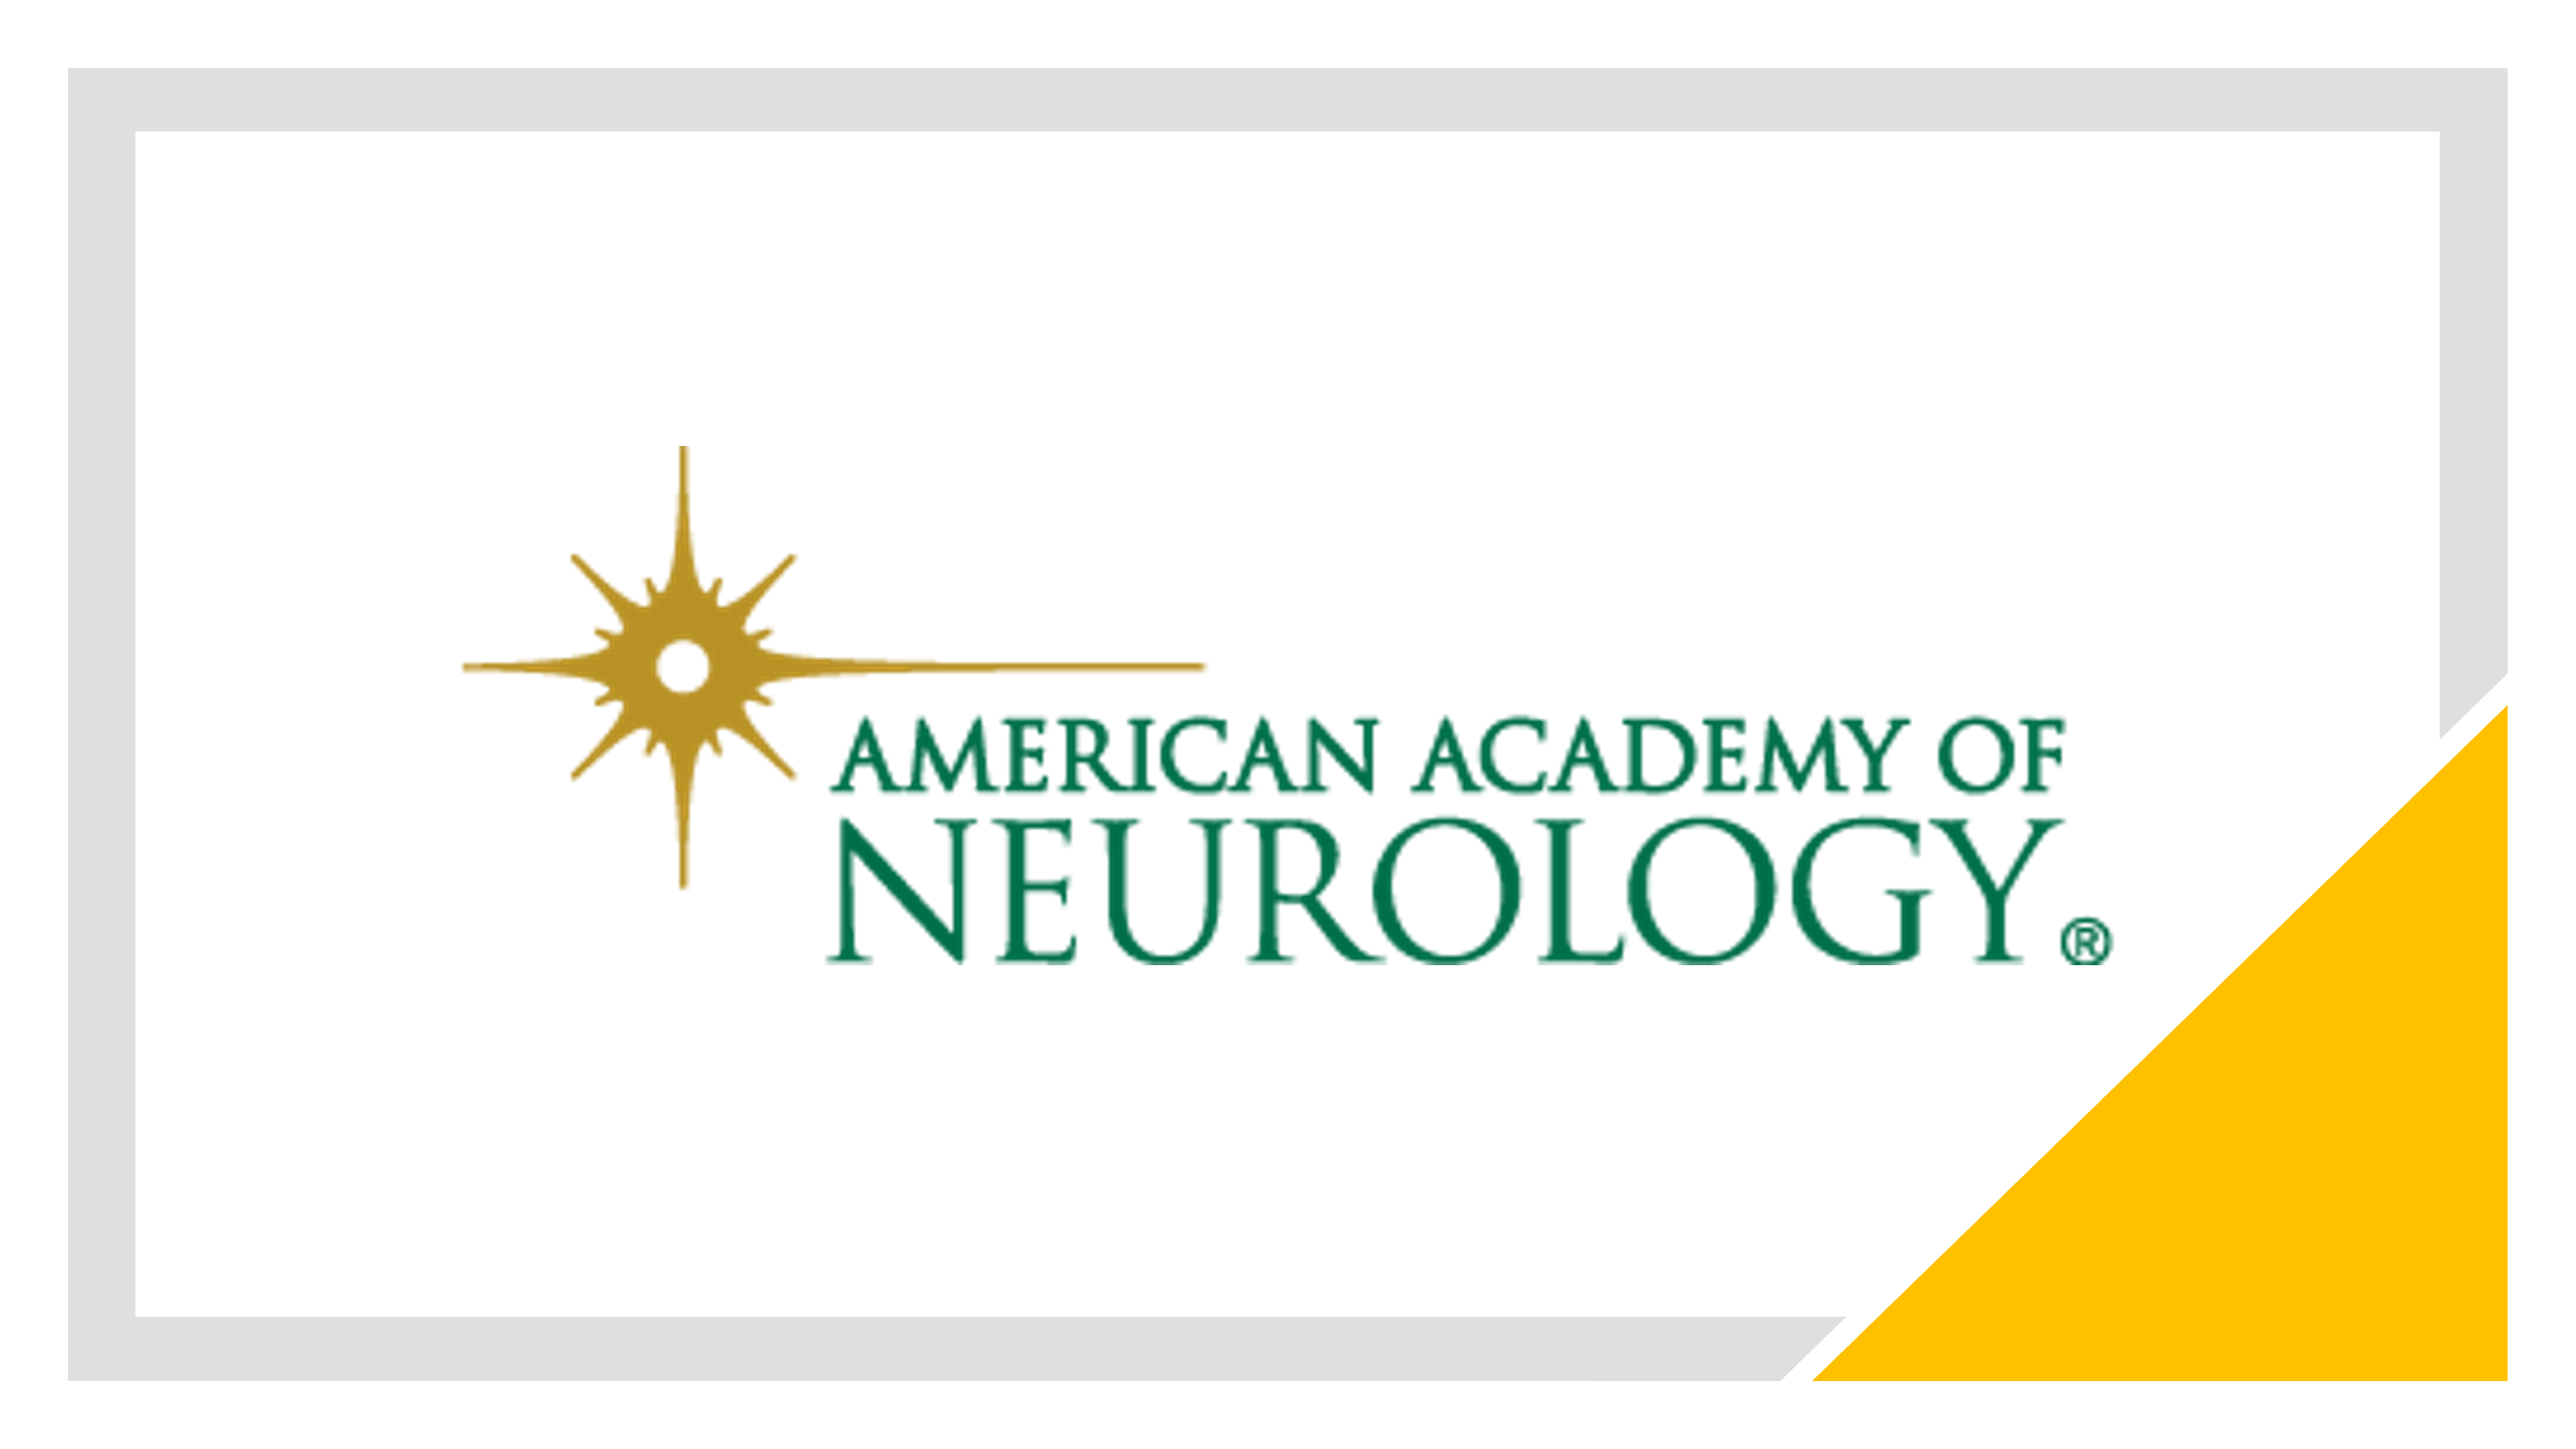 CloudMedx Predicts Survival in ALS with 82% accuracy based on clinical markers – Published by Barrow Neurological Institute